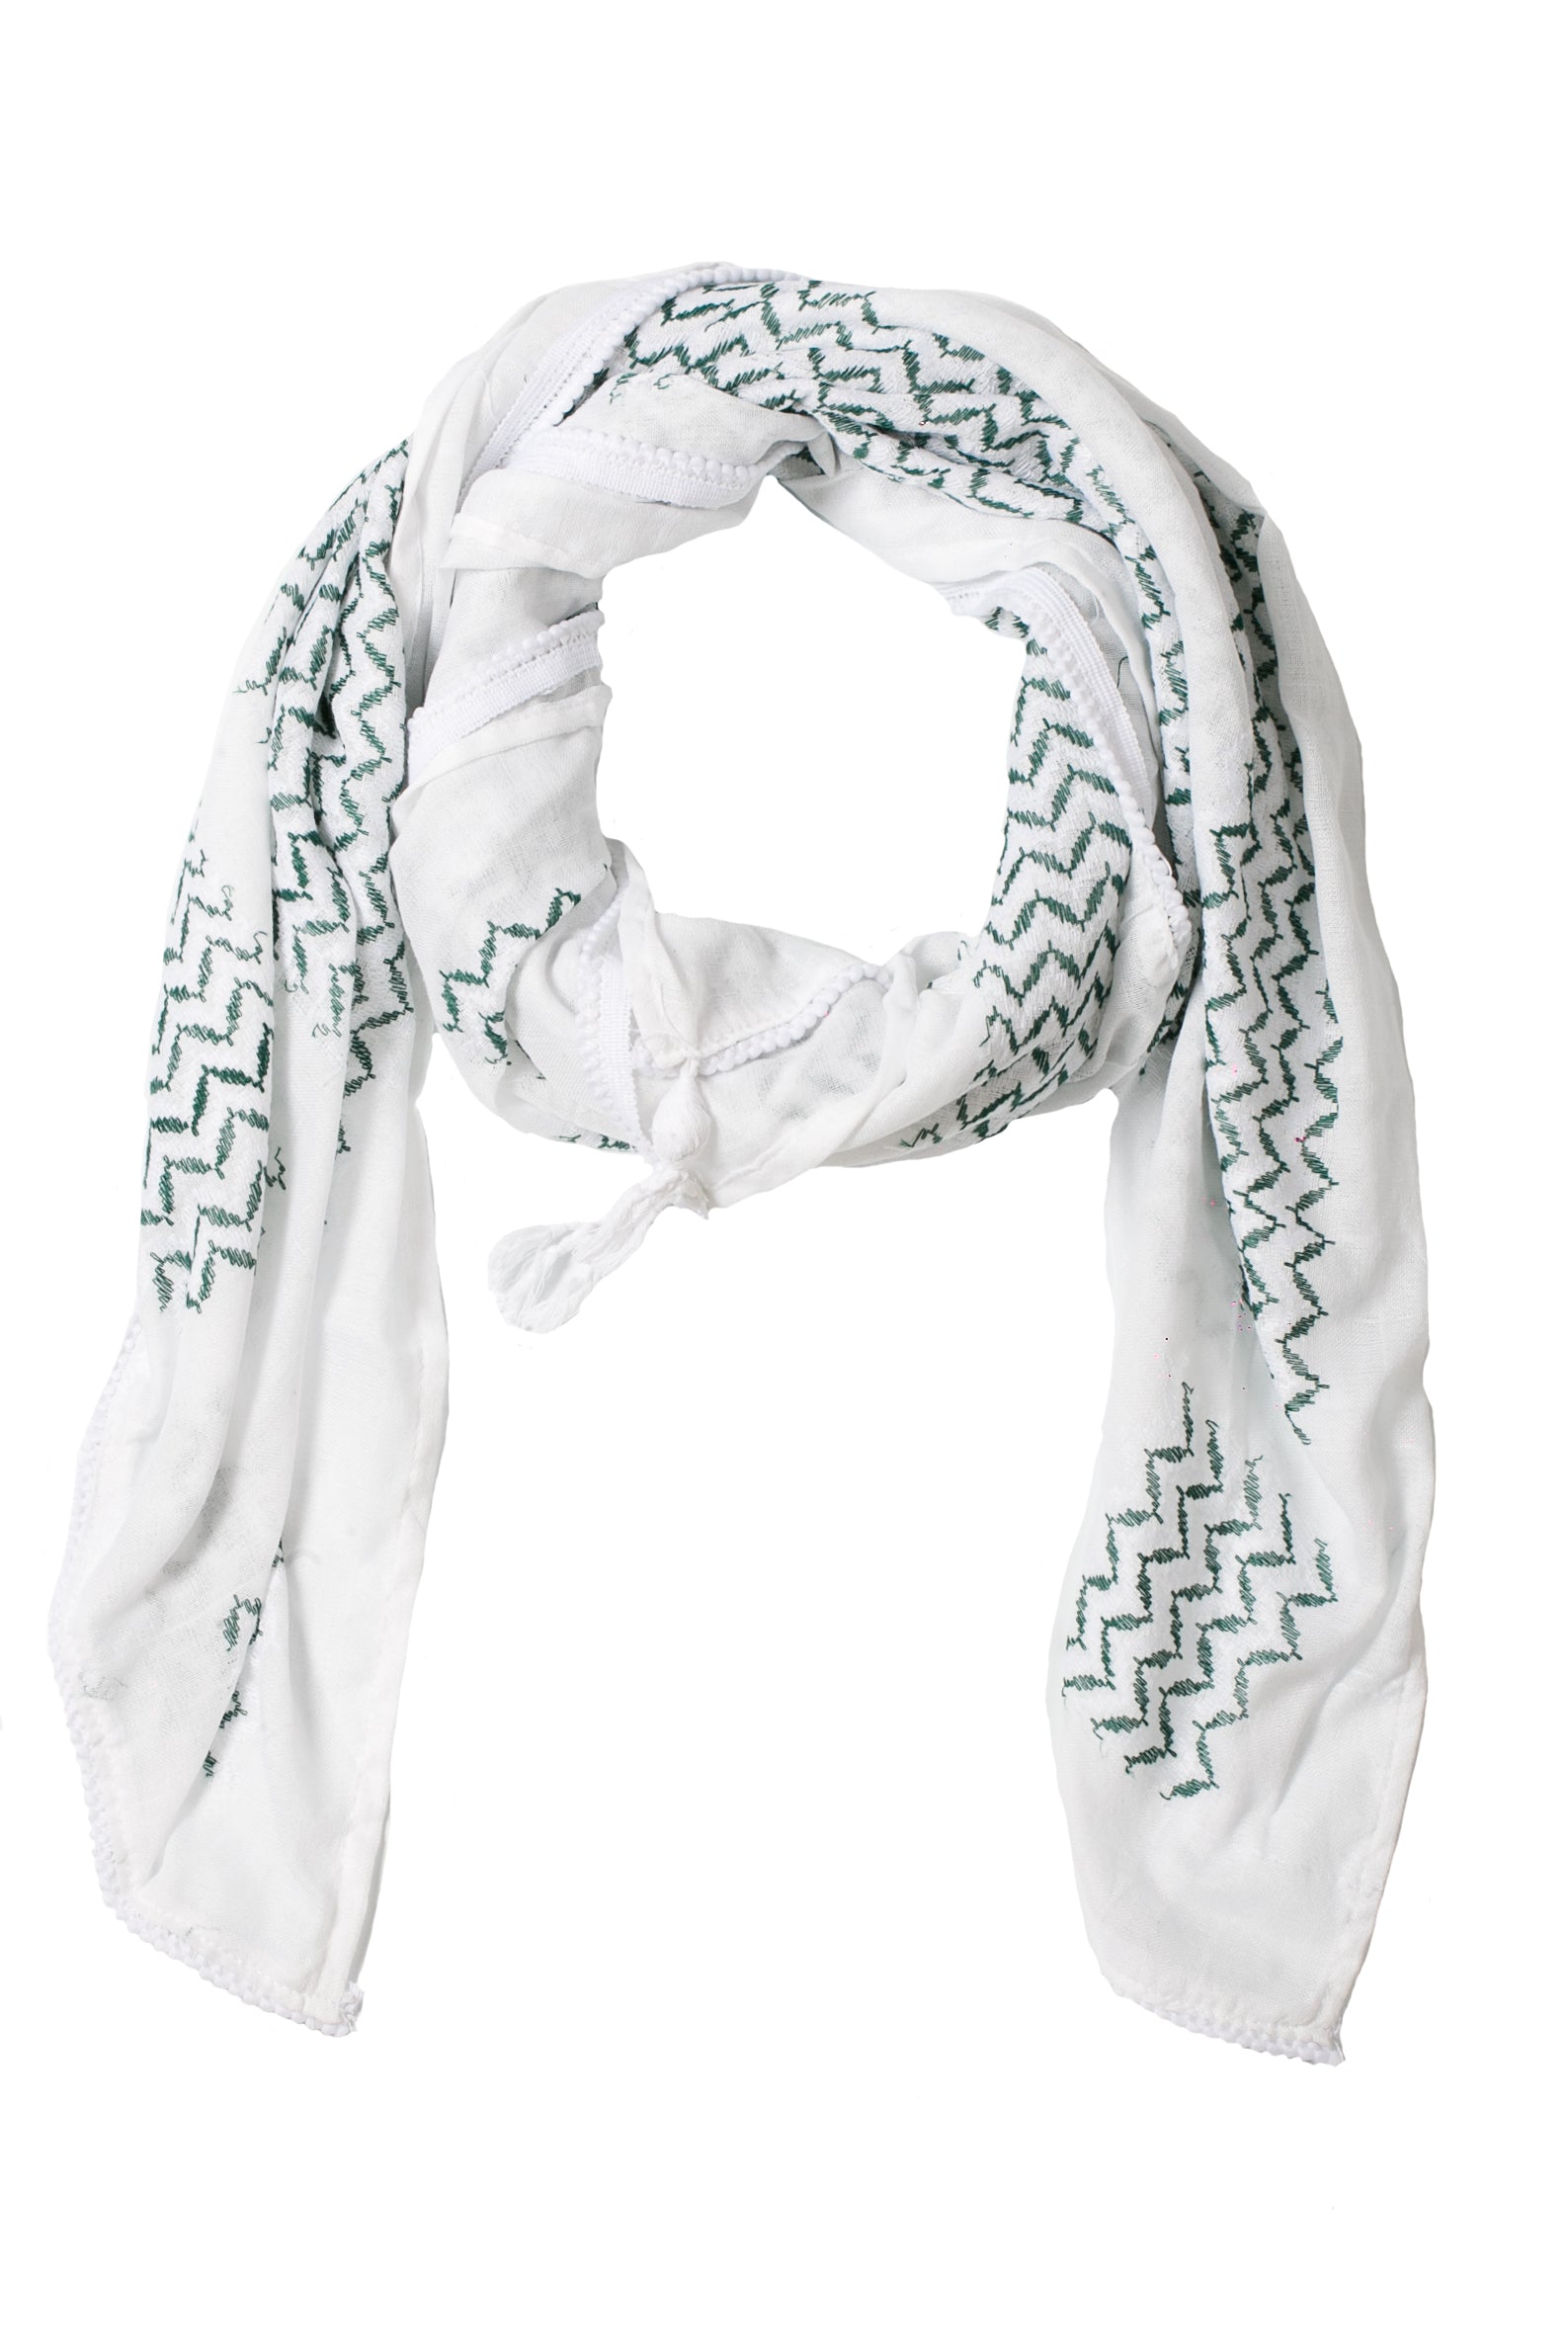 Light white scarf with Olive green pattern by Hirbawi USA